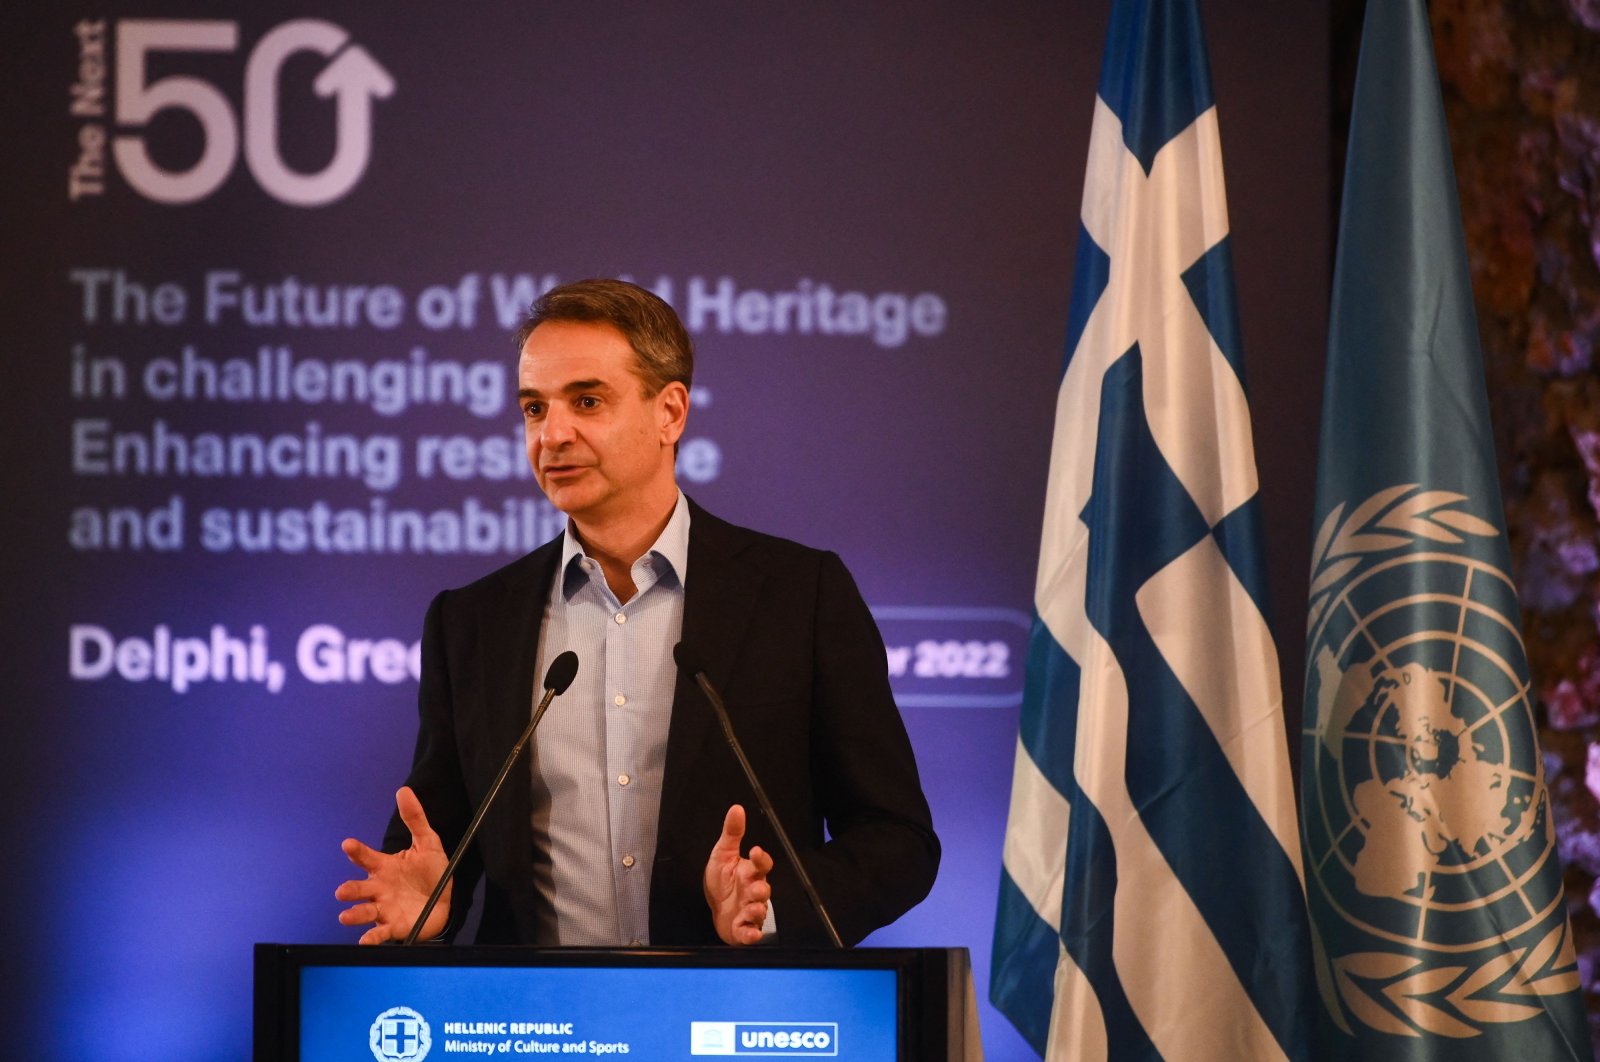 Greek Prime minister Kyriakos Mitsotakis speaks during a conference marking the 50th anniversary of the UNESCO World Heritage Convention in Delphi on Nov.17, 2022. (AFP File Photo)